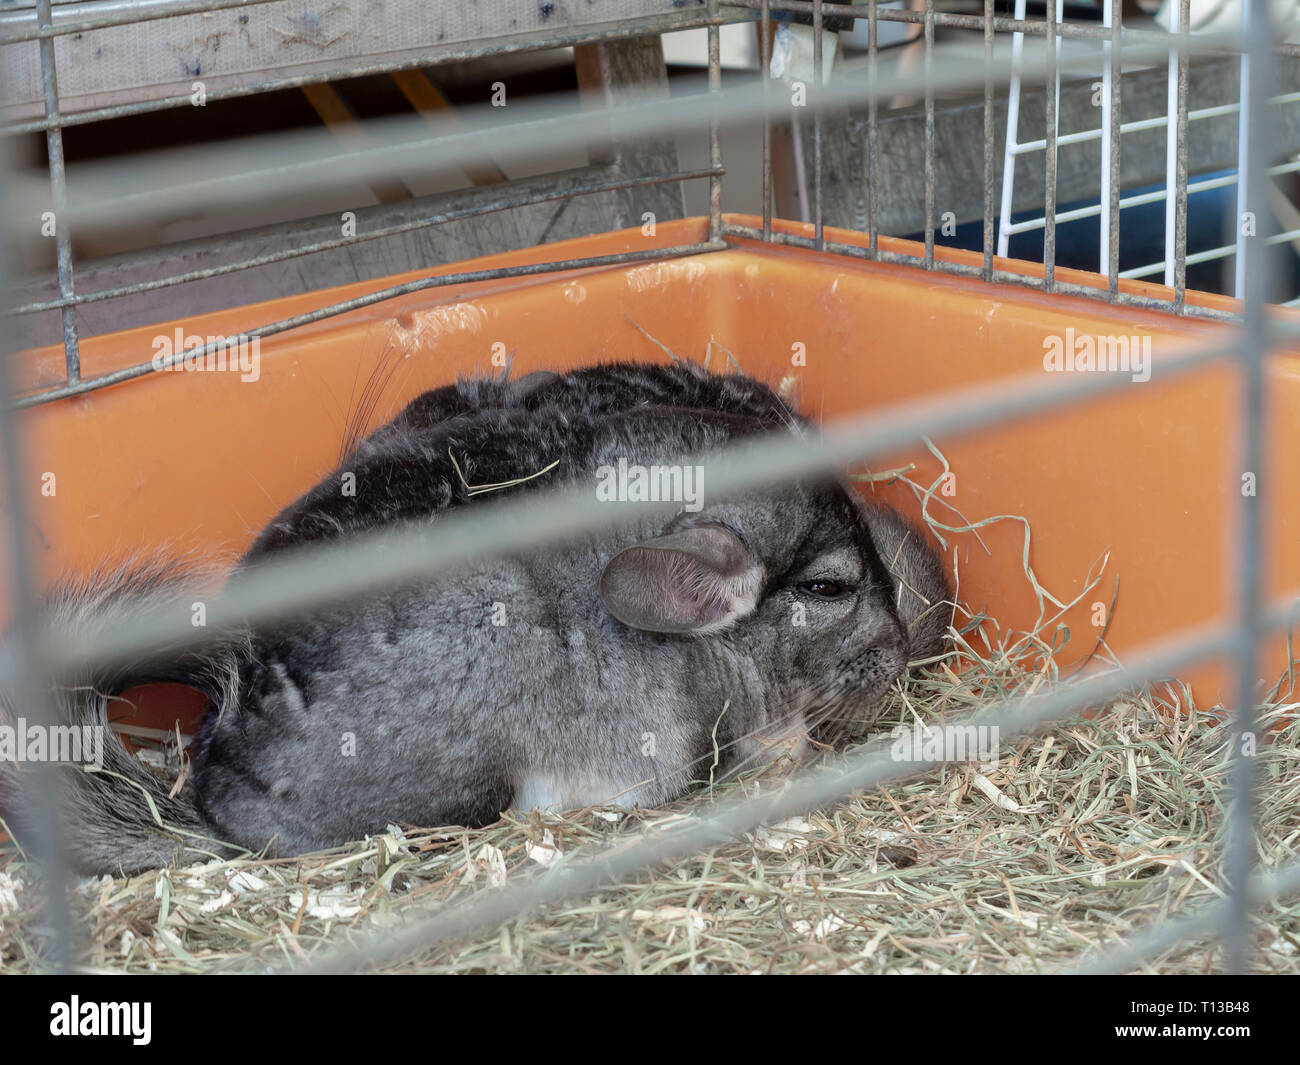 Chinchillas for sale as pets in street market. They come originally from South America. Cute. Stock Photo